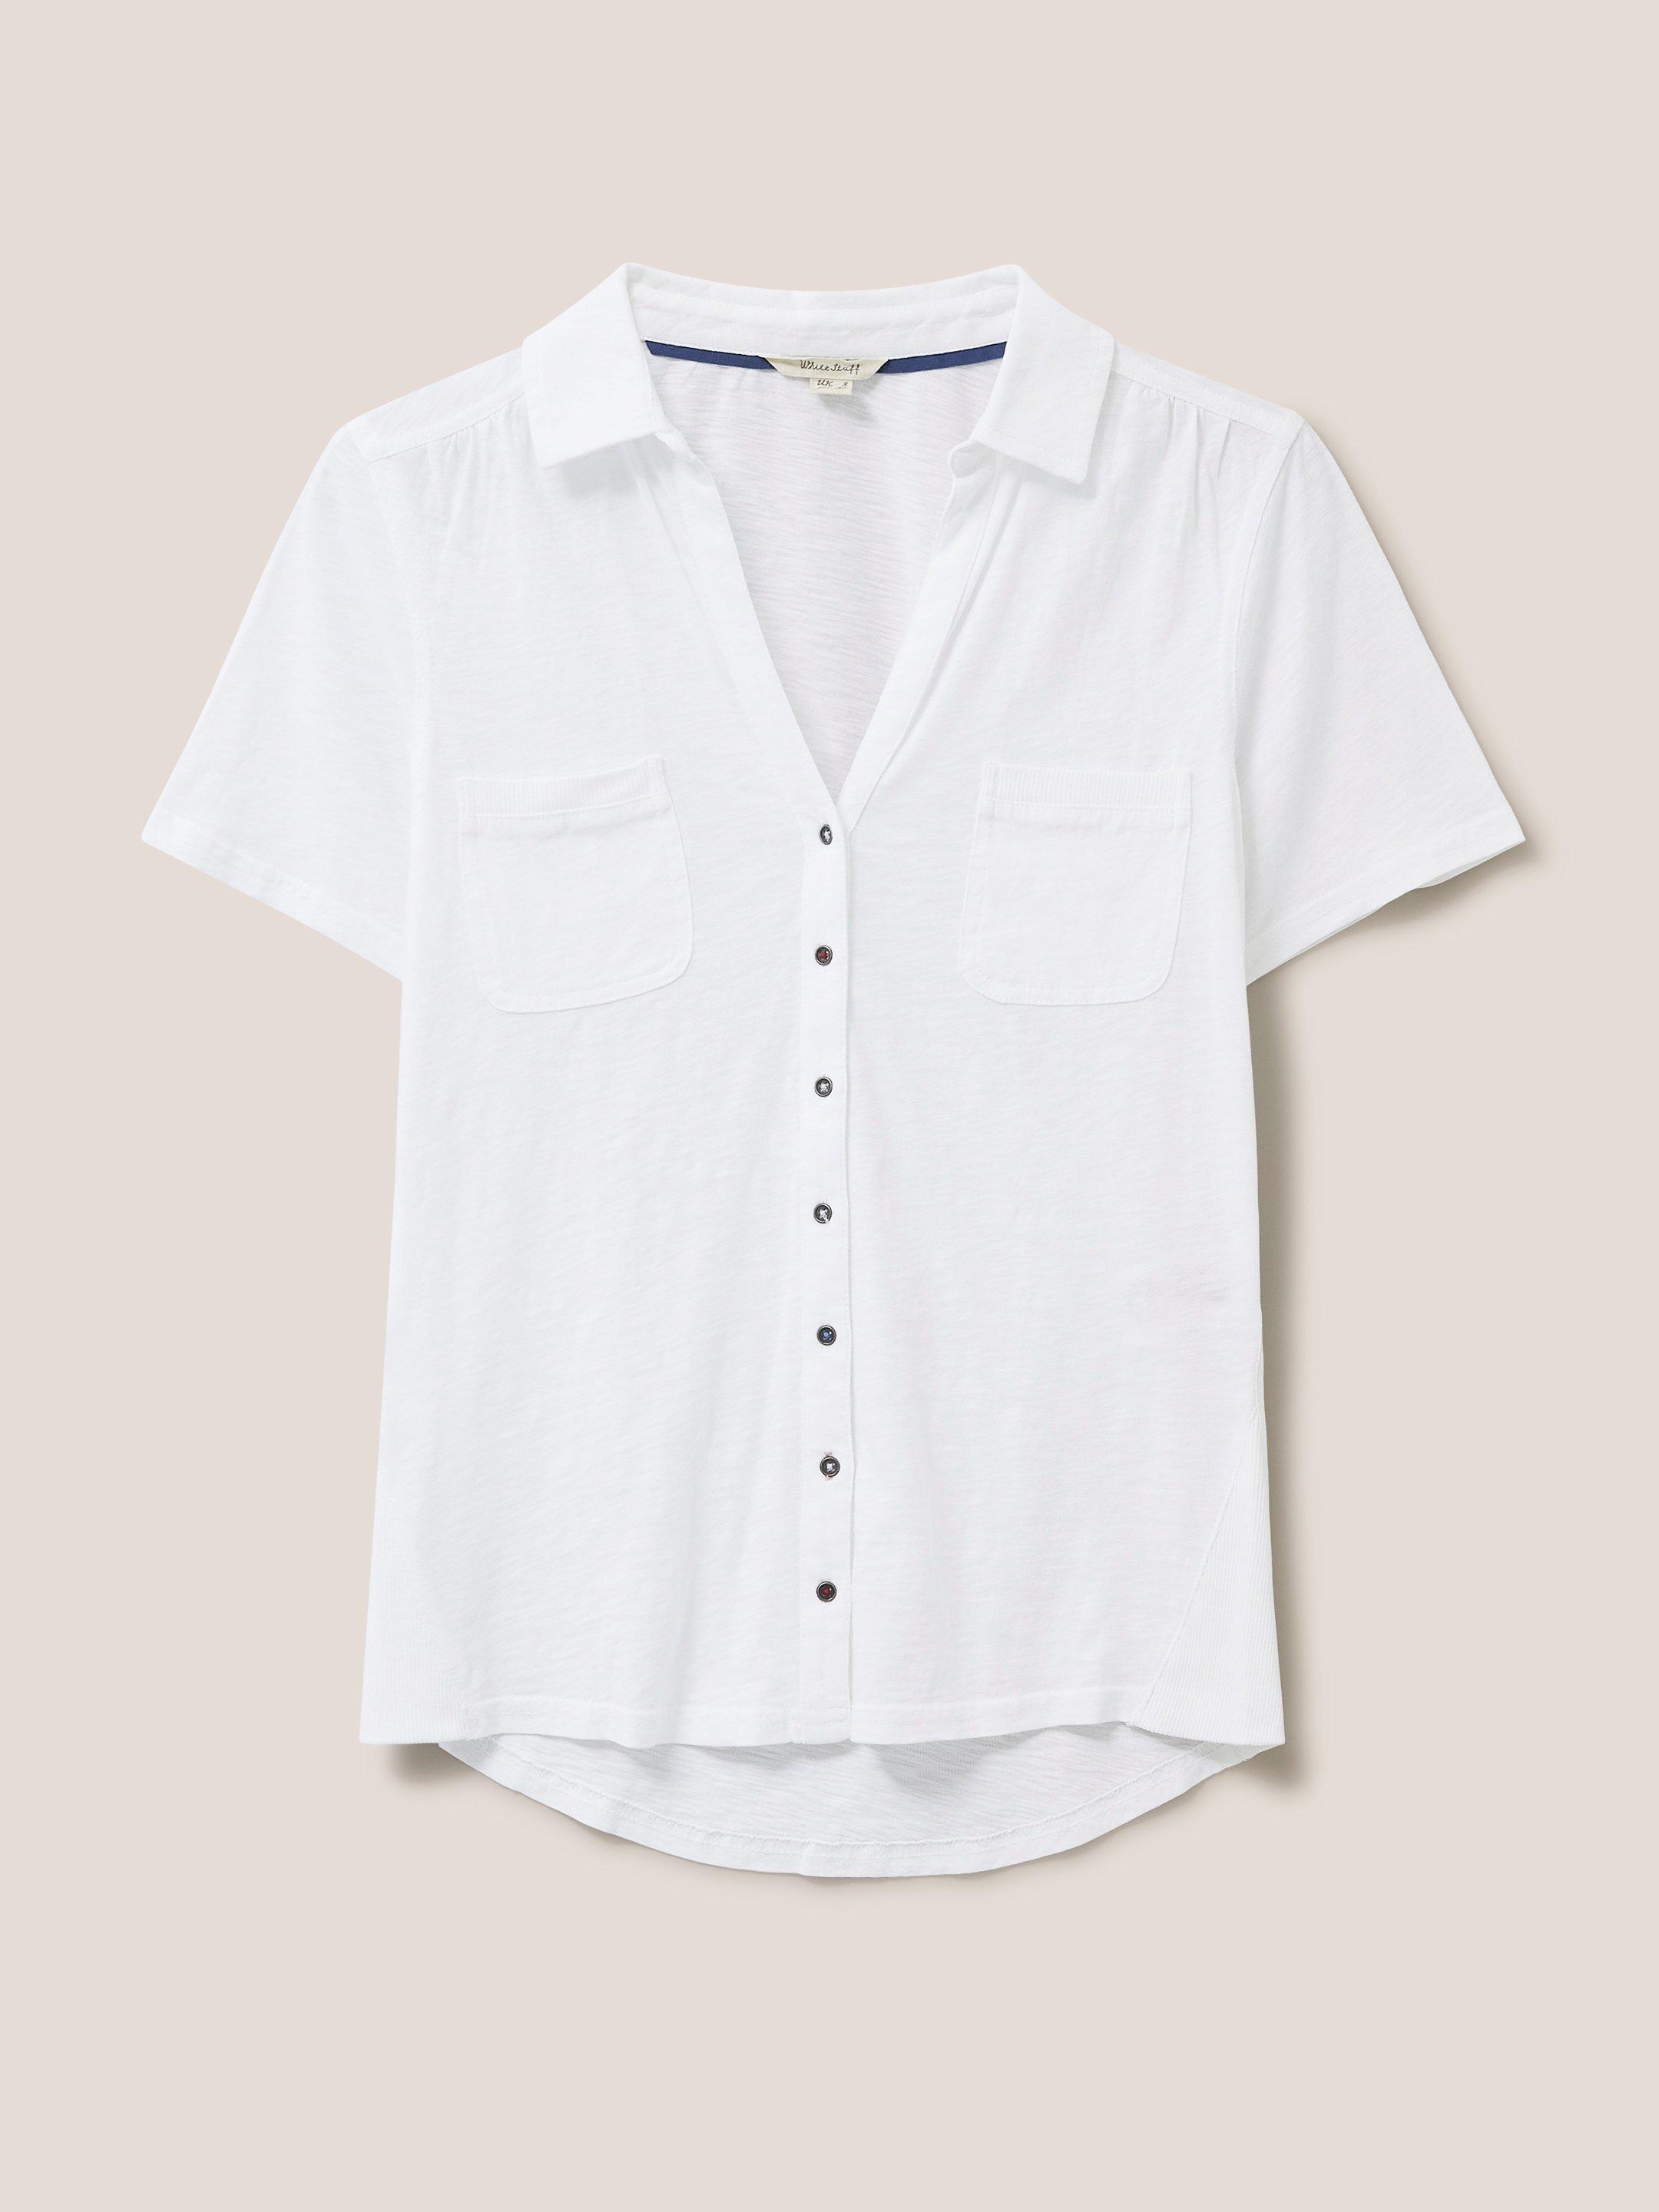 Penny Pocket Jersey Shirt in BRIL WHITE - FLAT FRONT